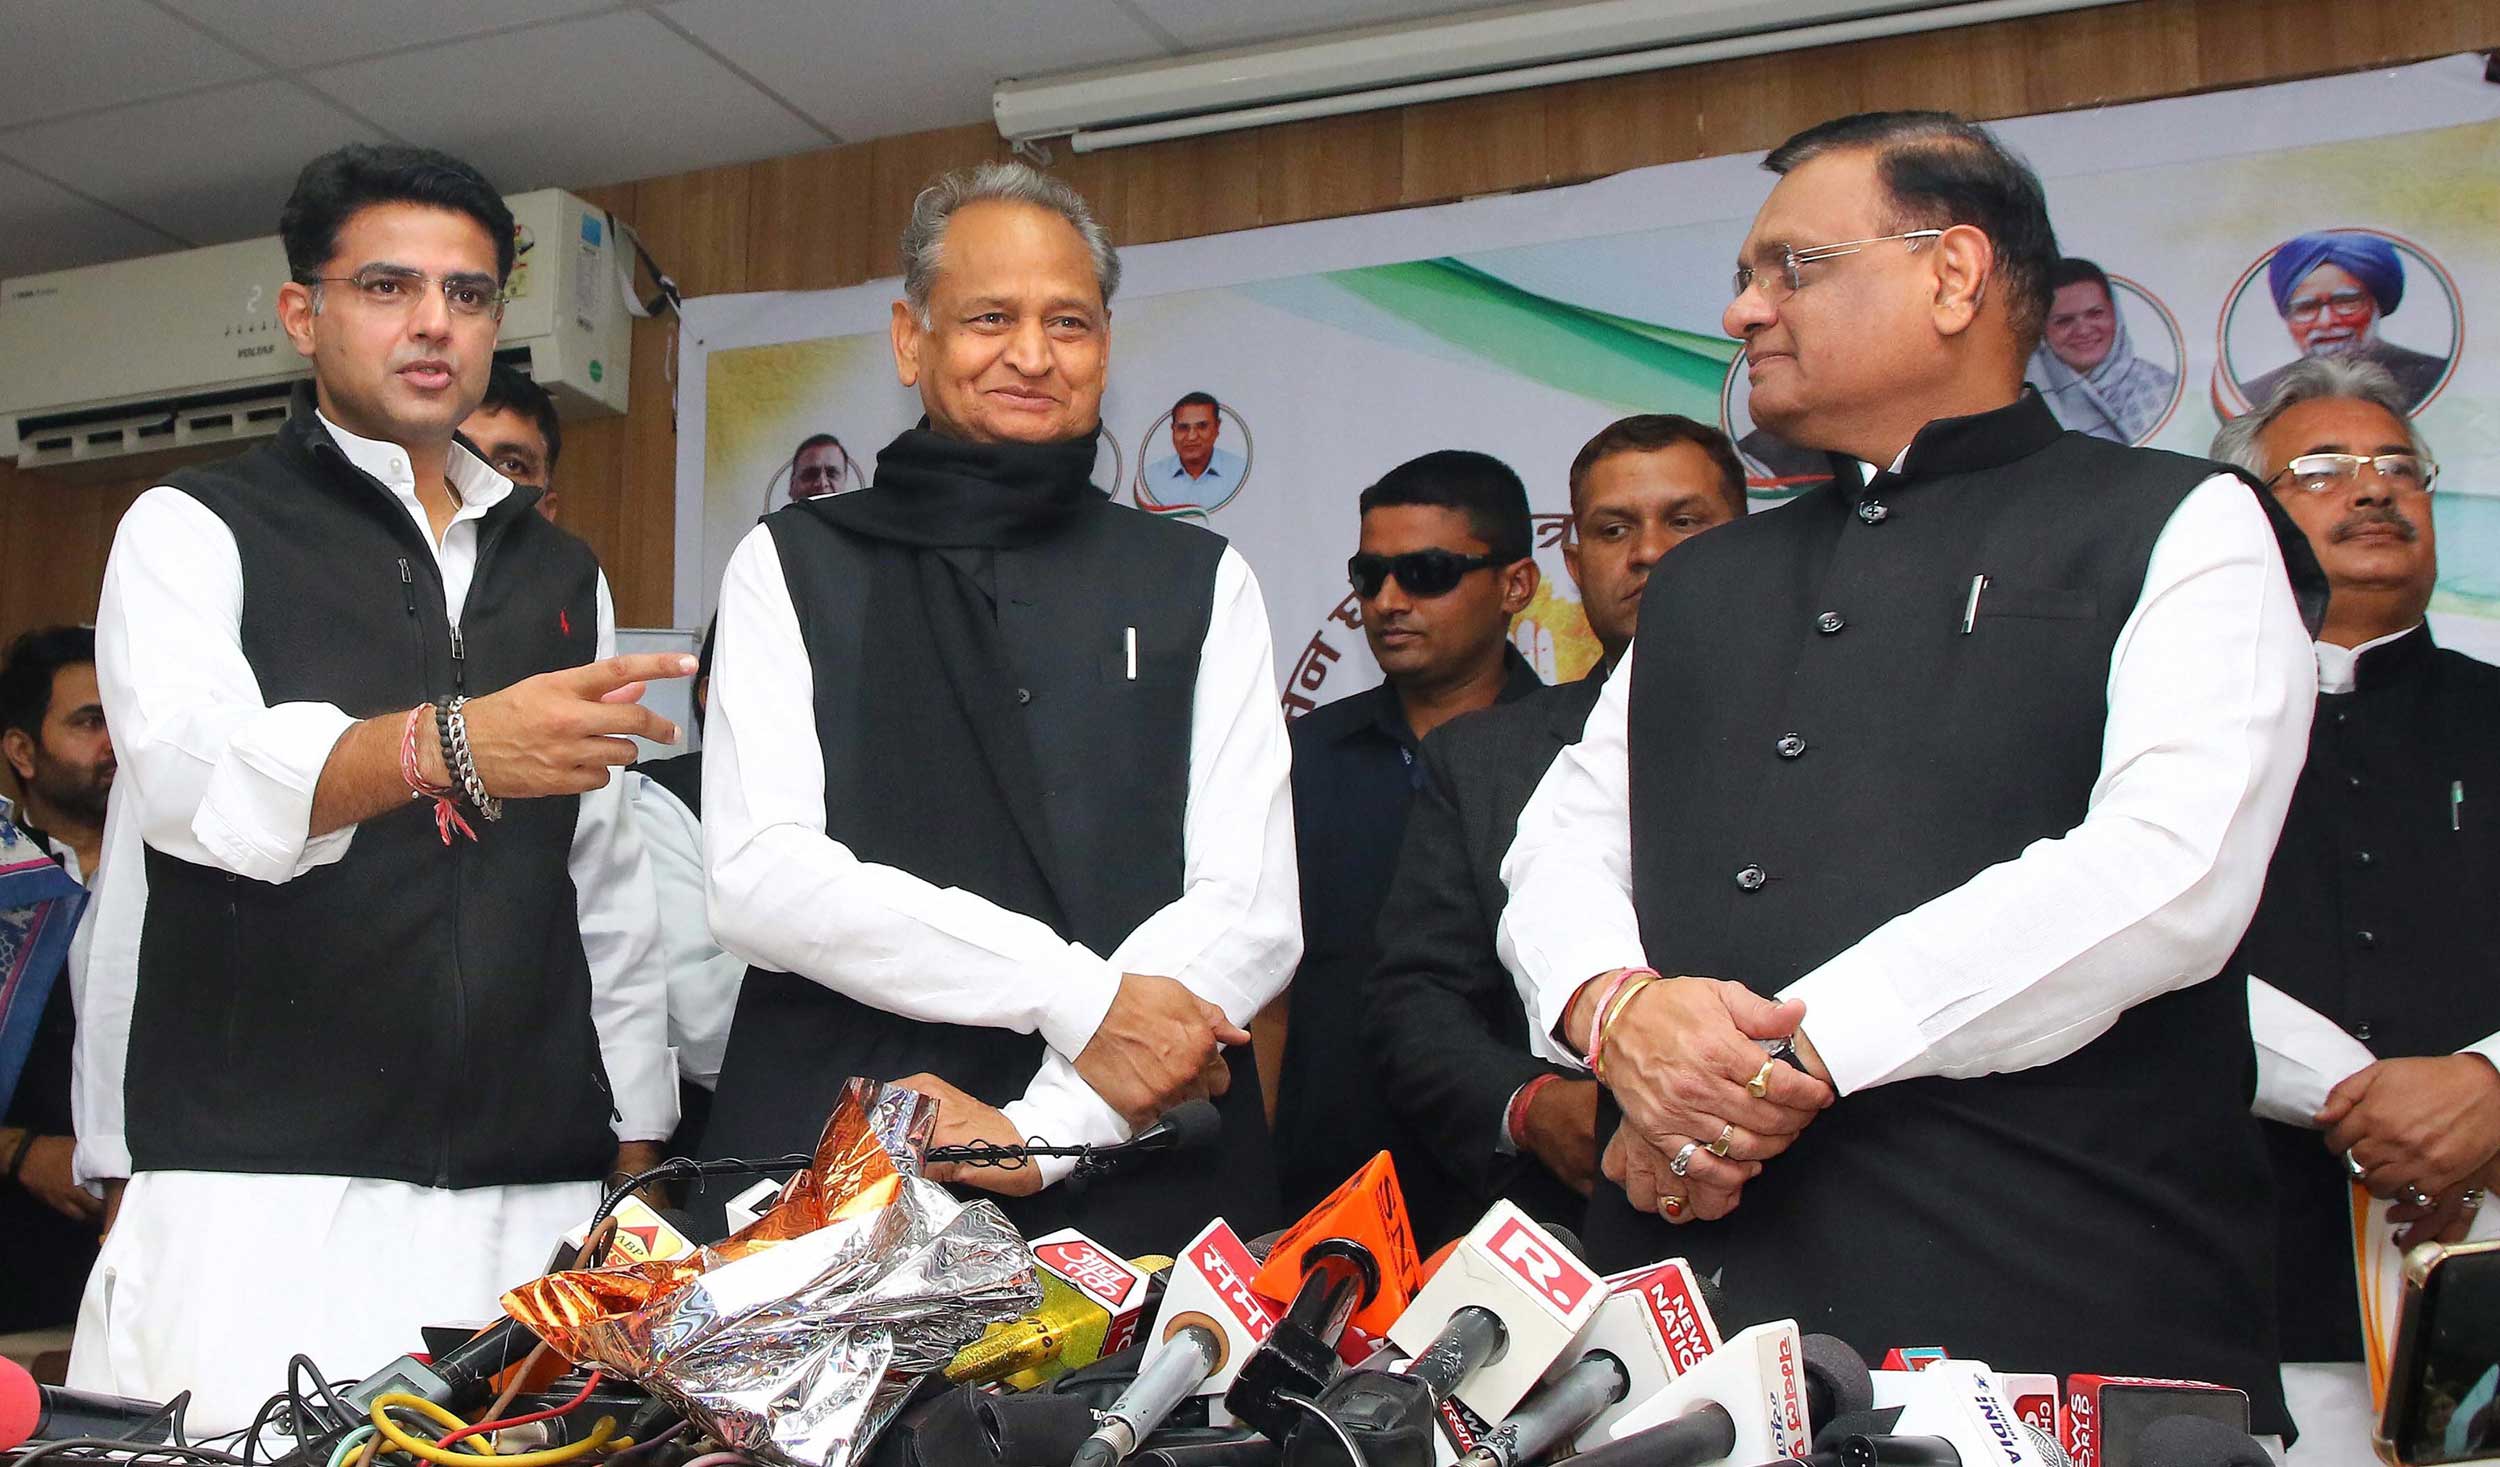 Rajasthan Congress chief Sachin Pilot and Congress general secretary Ashok Gehlot during the release of the party manifesto for the Rajasthan Assembly elections  in Jaipur on Thursday.